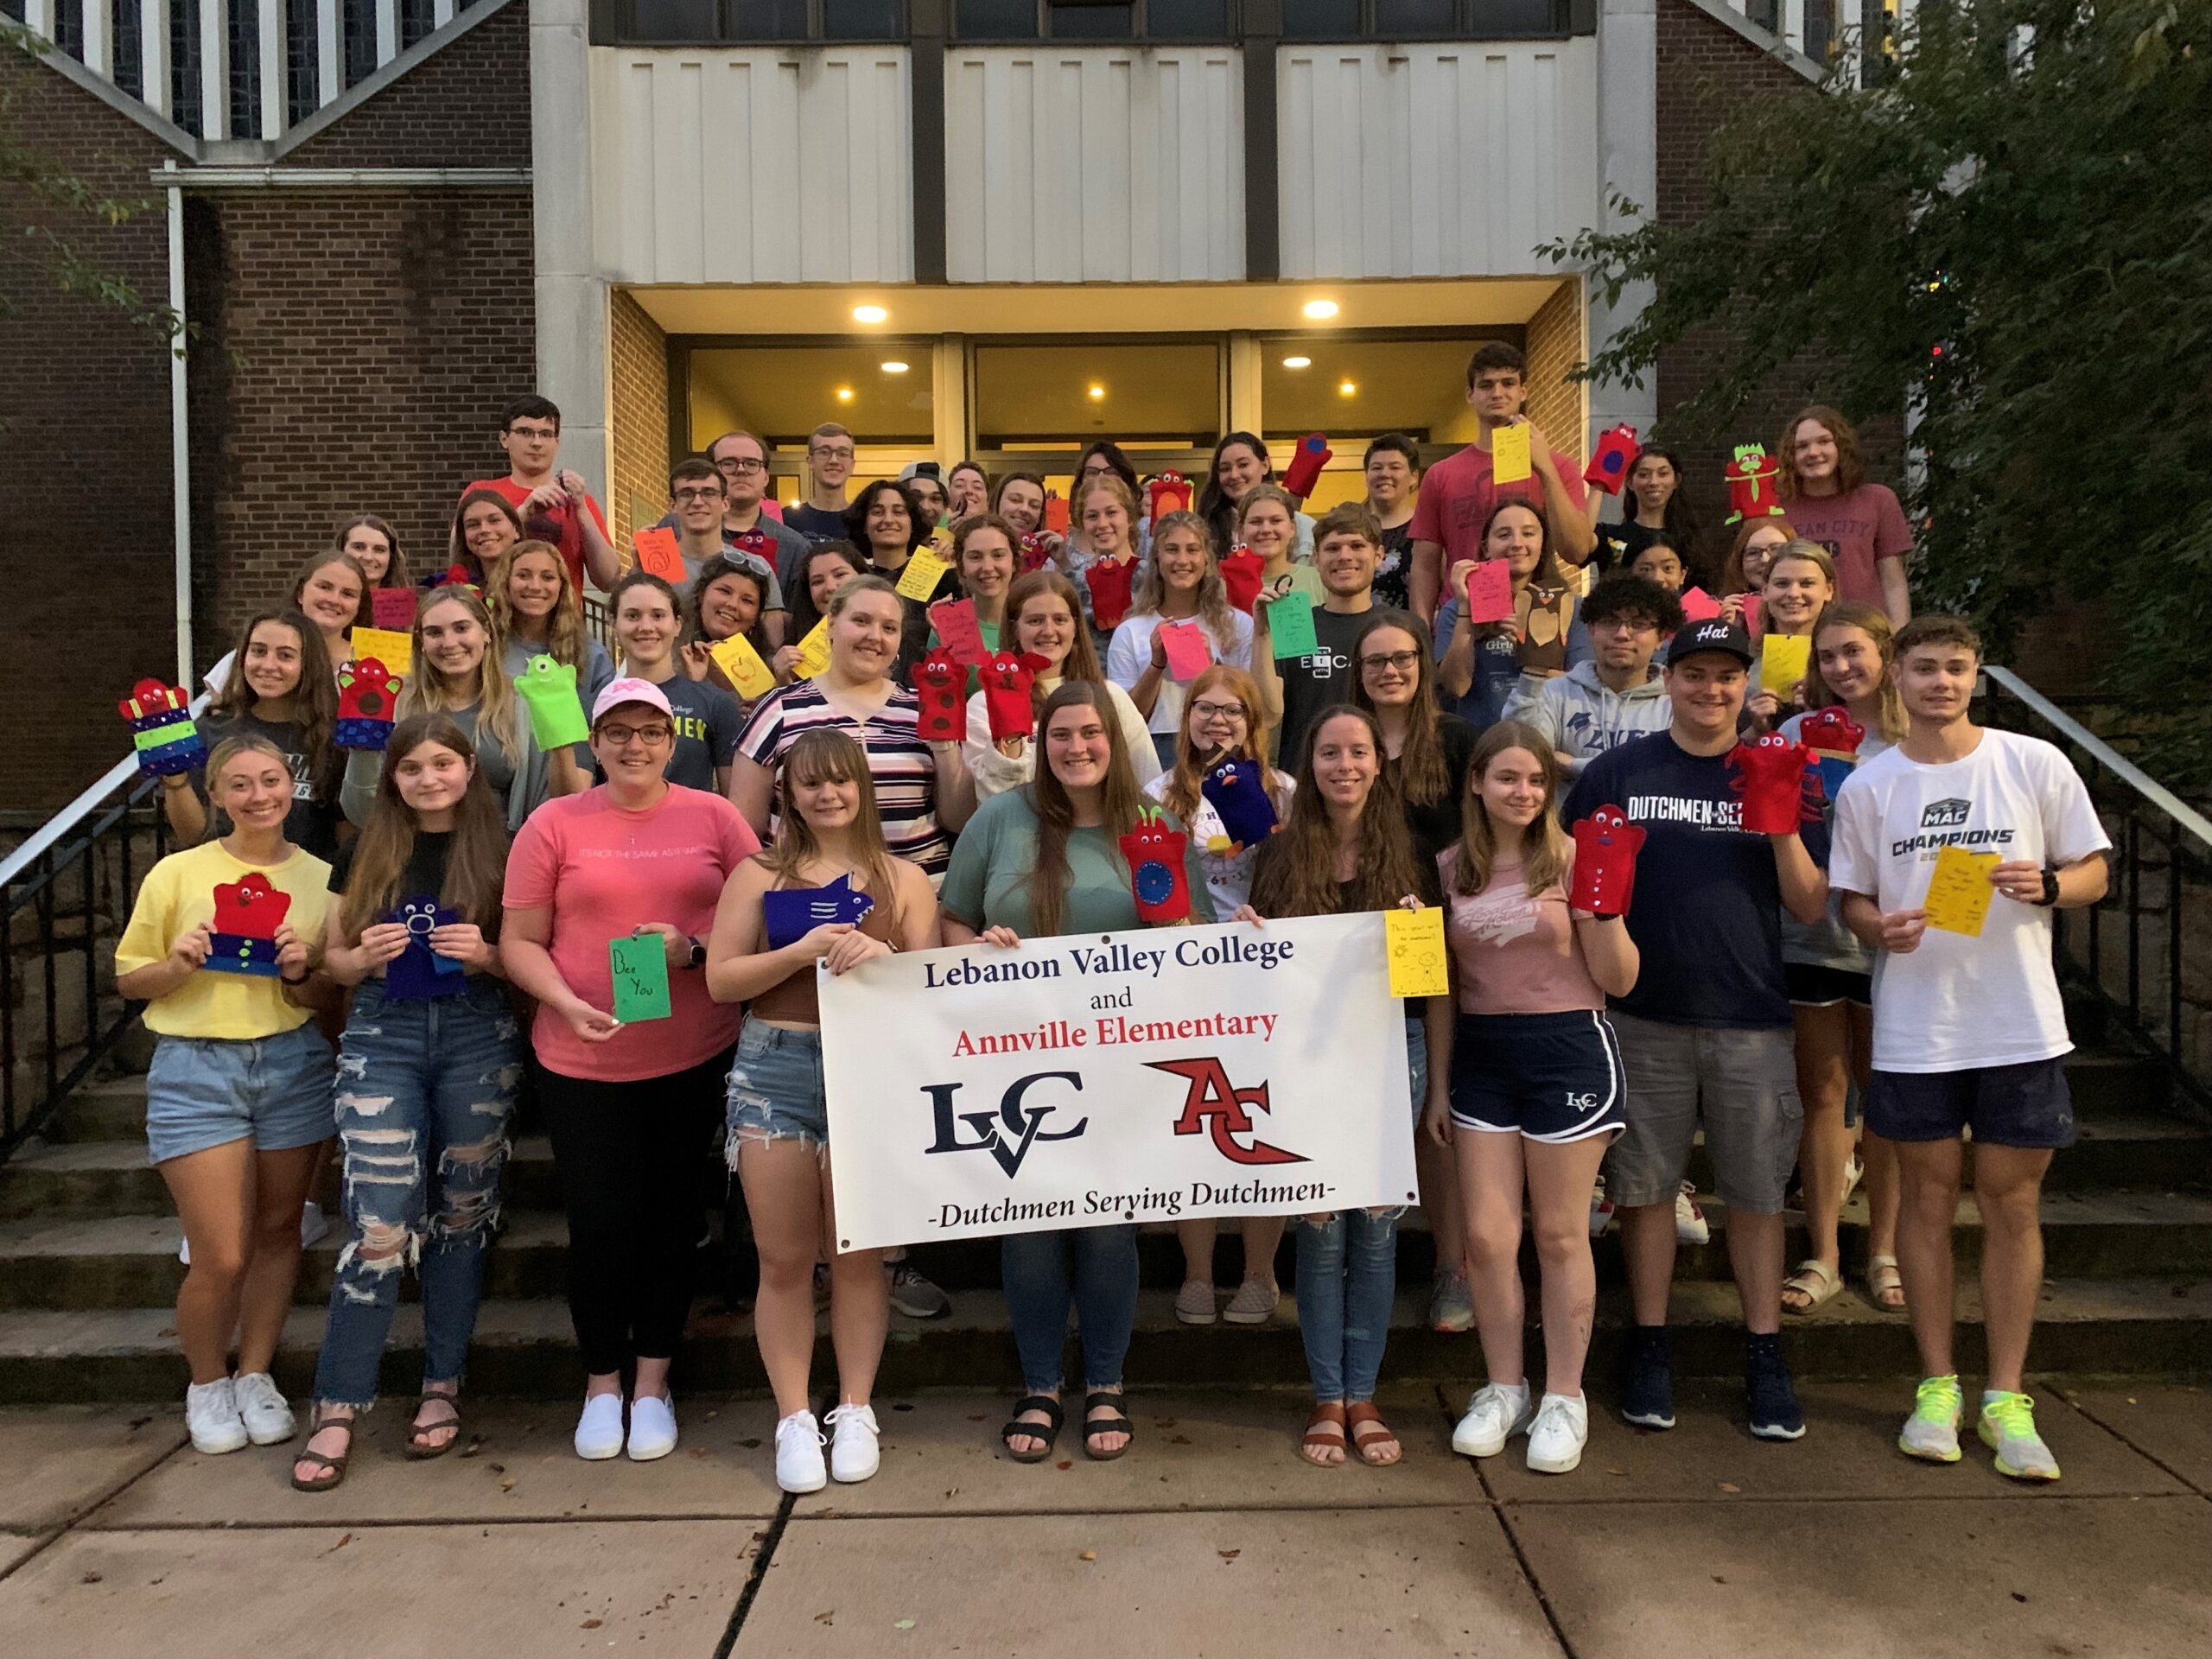 LVC students participate in Night of Service at Annville Elementary